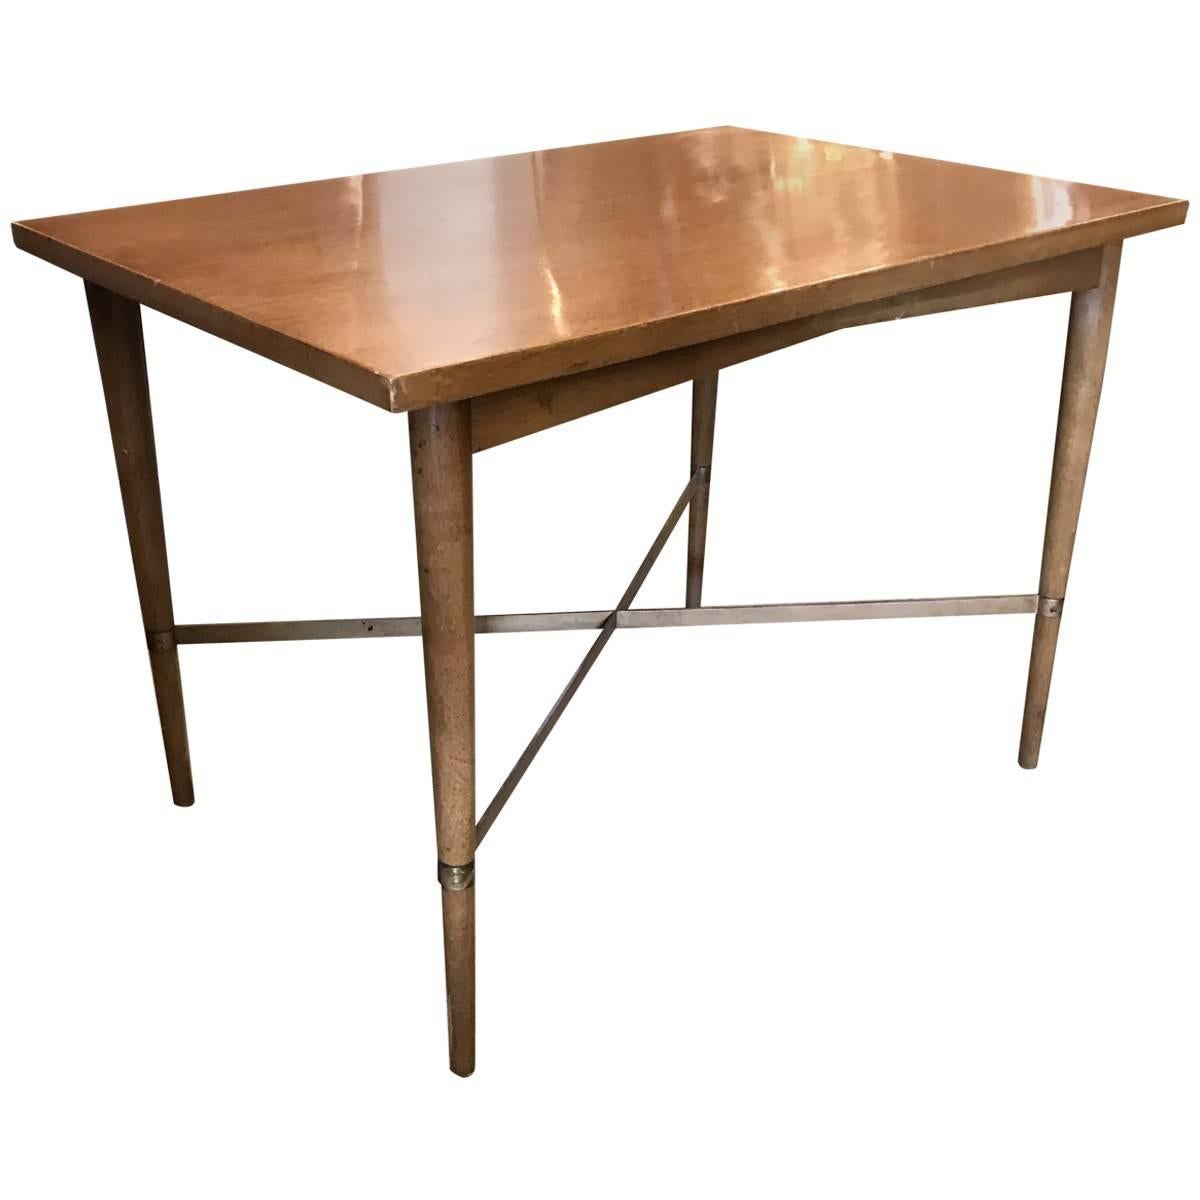 This exquisite stained mahogany and brass side table, designed by American Mid-Century Furniture and Industrial designer Paul McCobb, was manufactured by H. Sacks and Sons. It features clean, simple lines, and brass X-shaped stretchers connect its